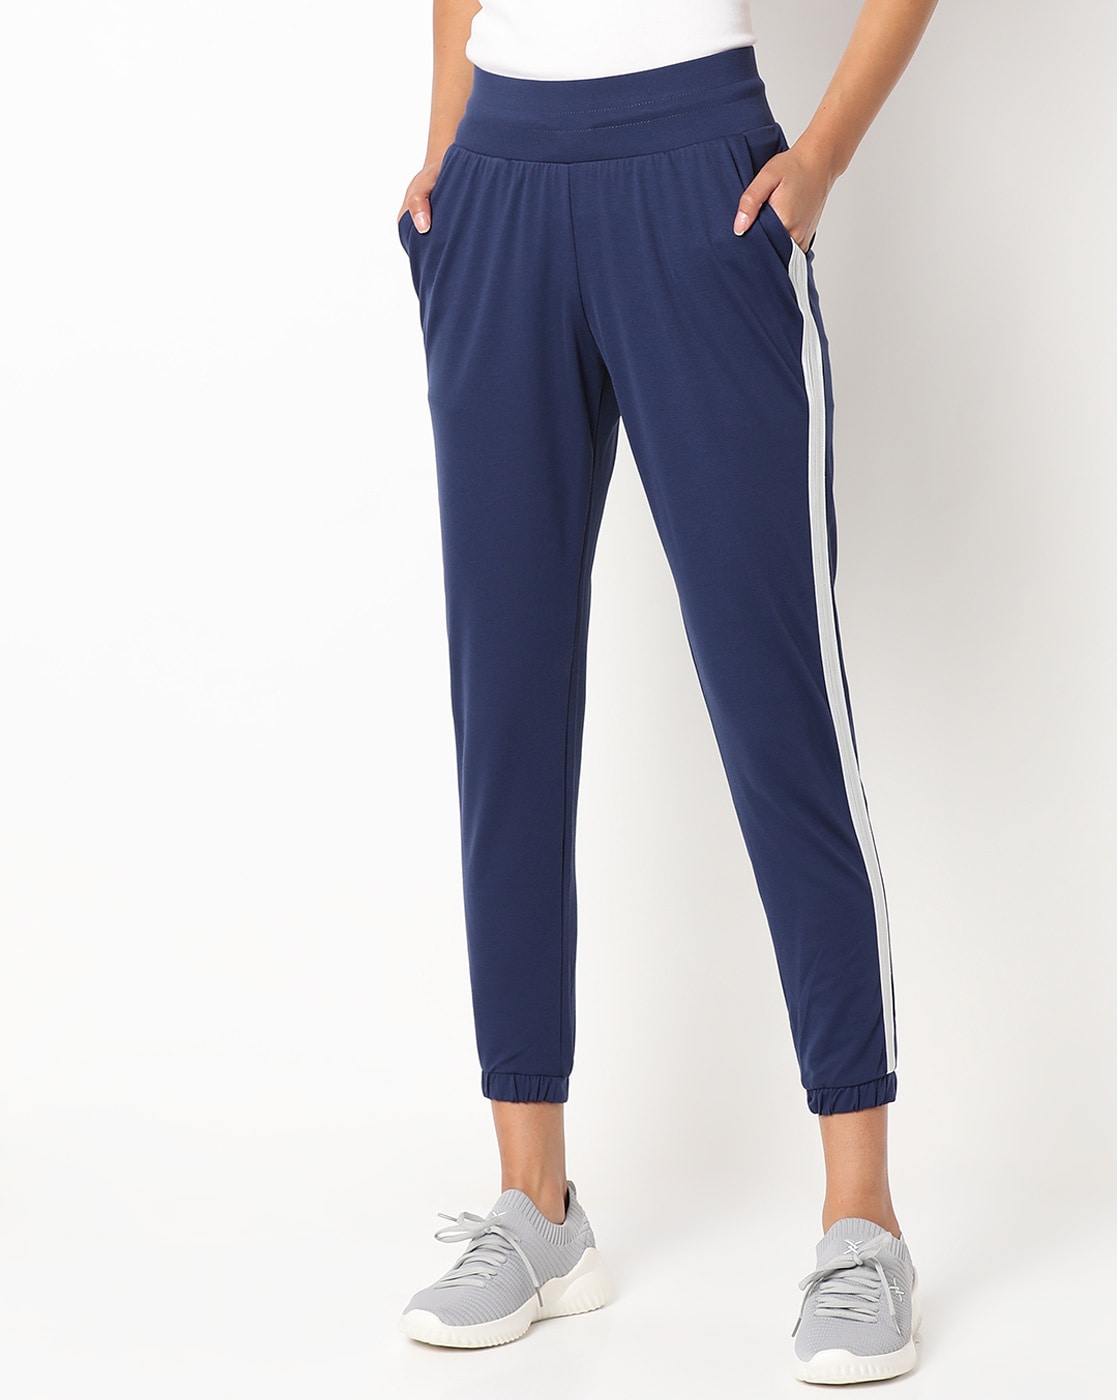 Washable Ladies Blue Regular Fit Sports Track Pants at Best Price in Delhi   Ny Clothing